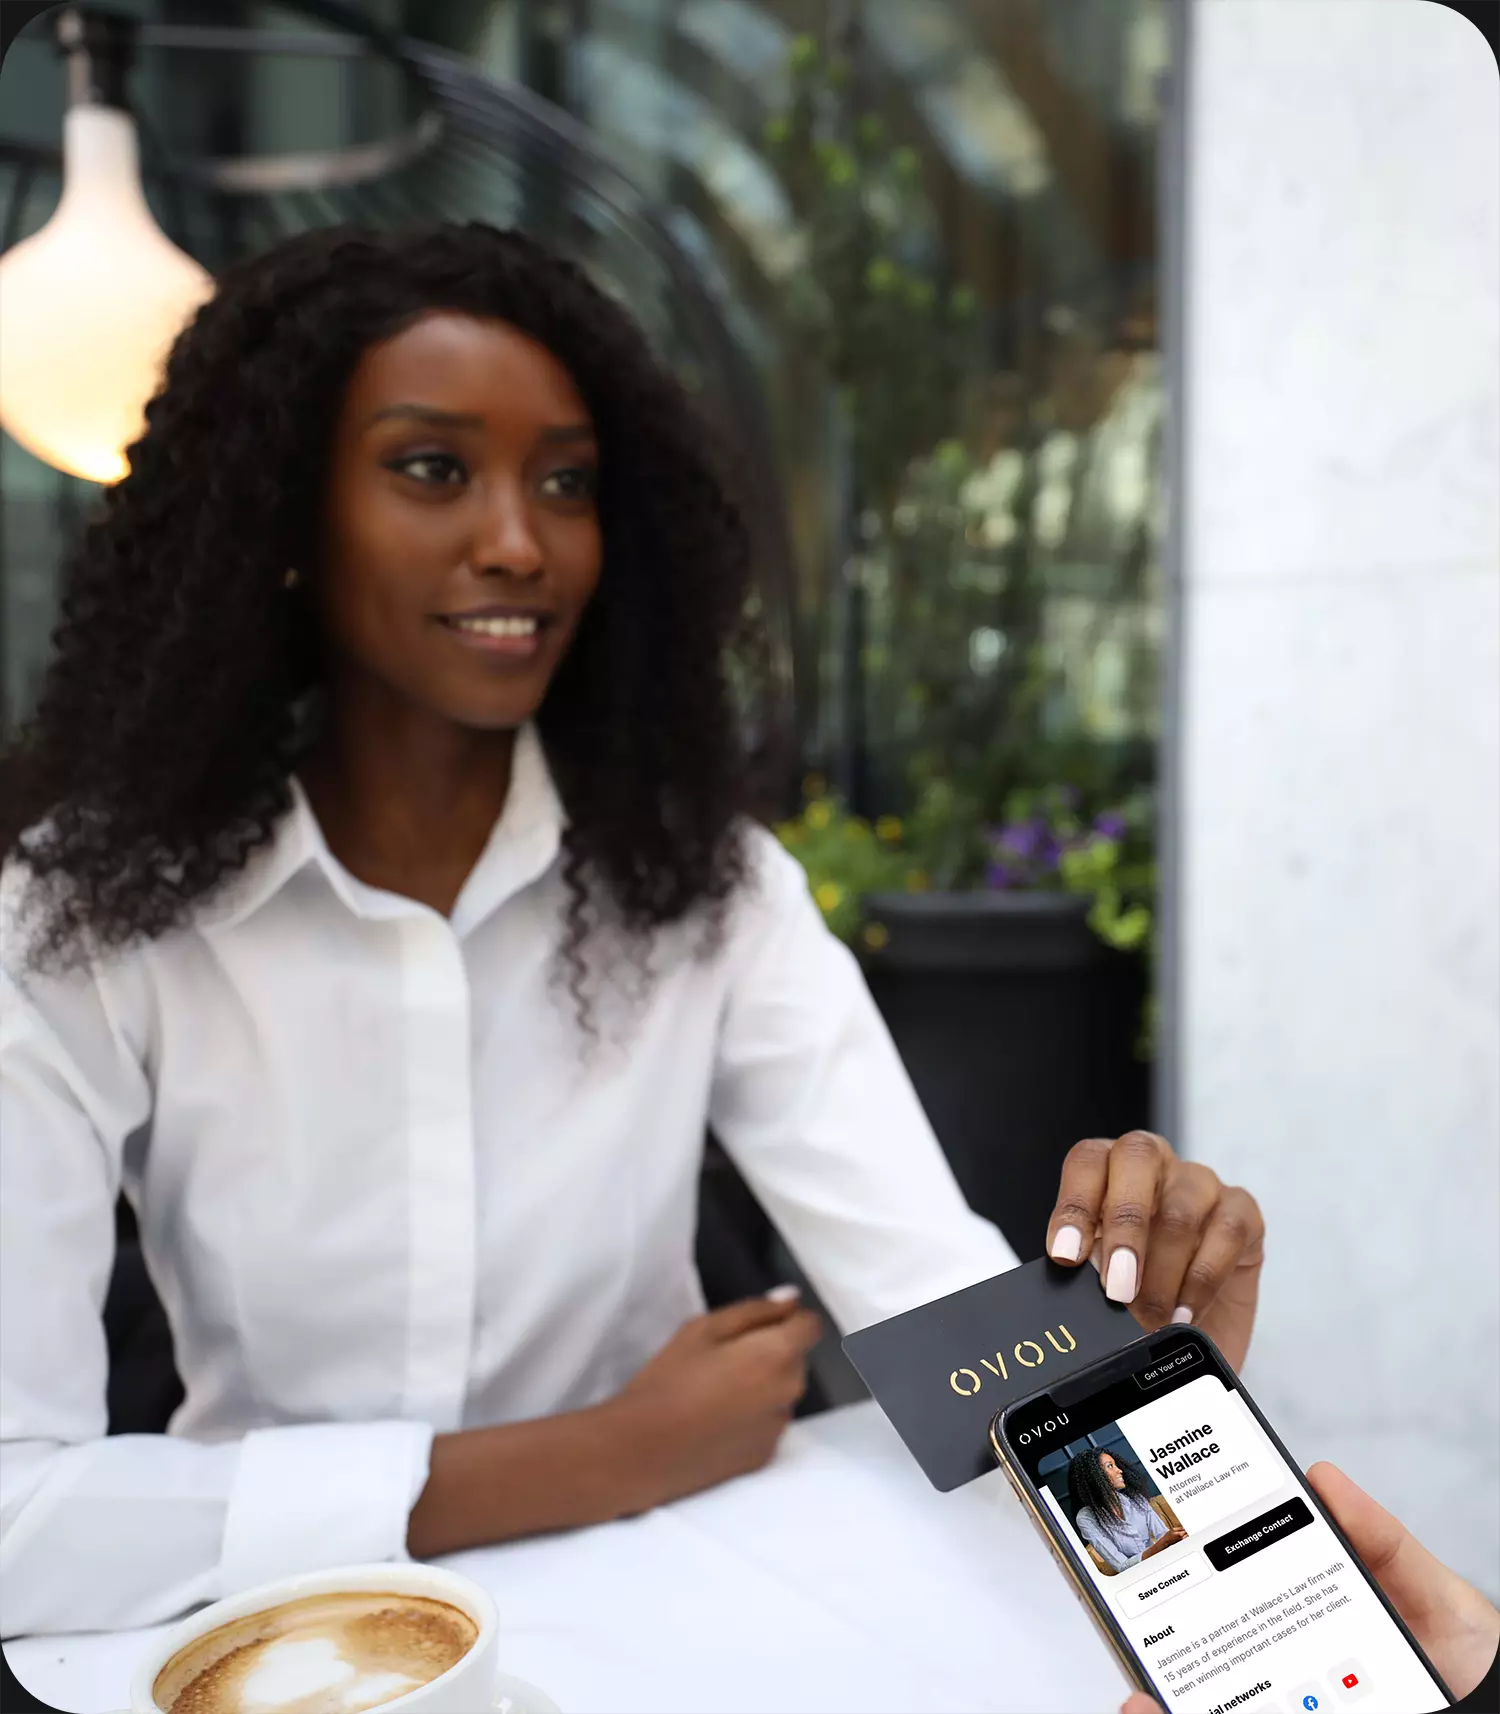 Black woman tapping her OVOU digital business card on prospects phone. Her OVOU profile is shown on mobile phone of recipient. Setting is high end / premium restaurant with fireplace on the right and cafe latte on the table.